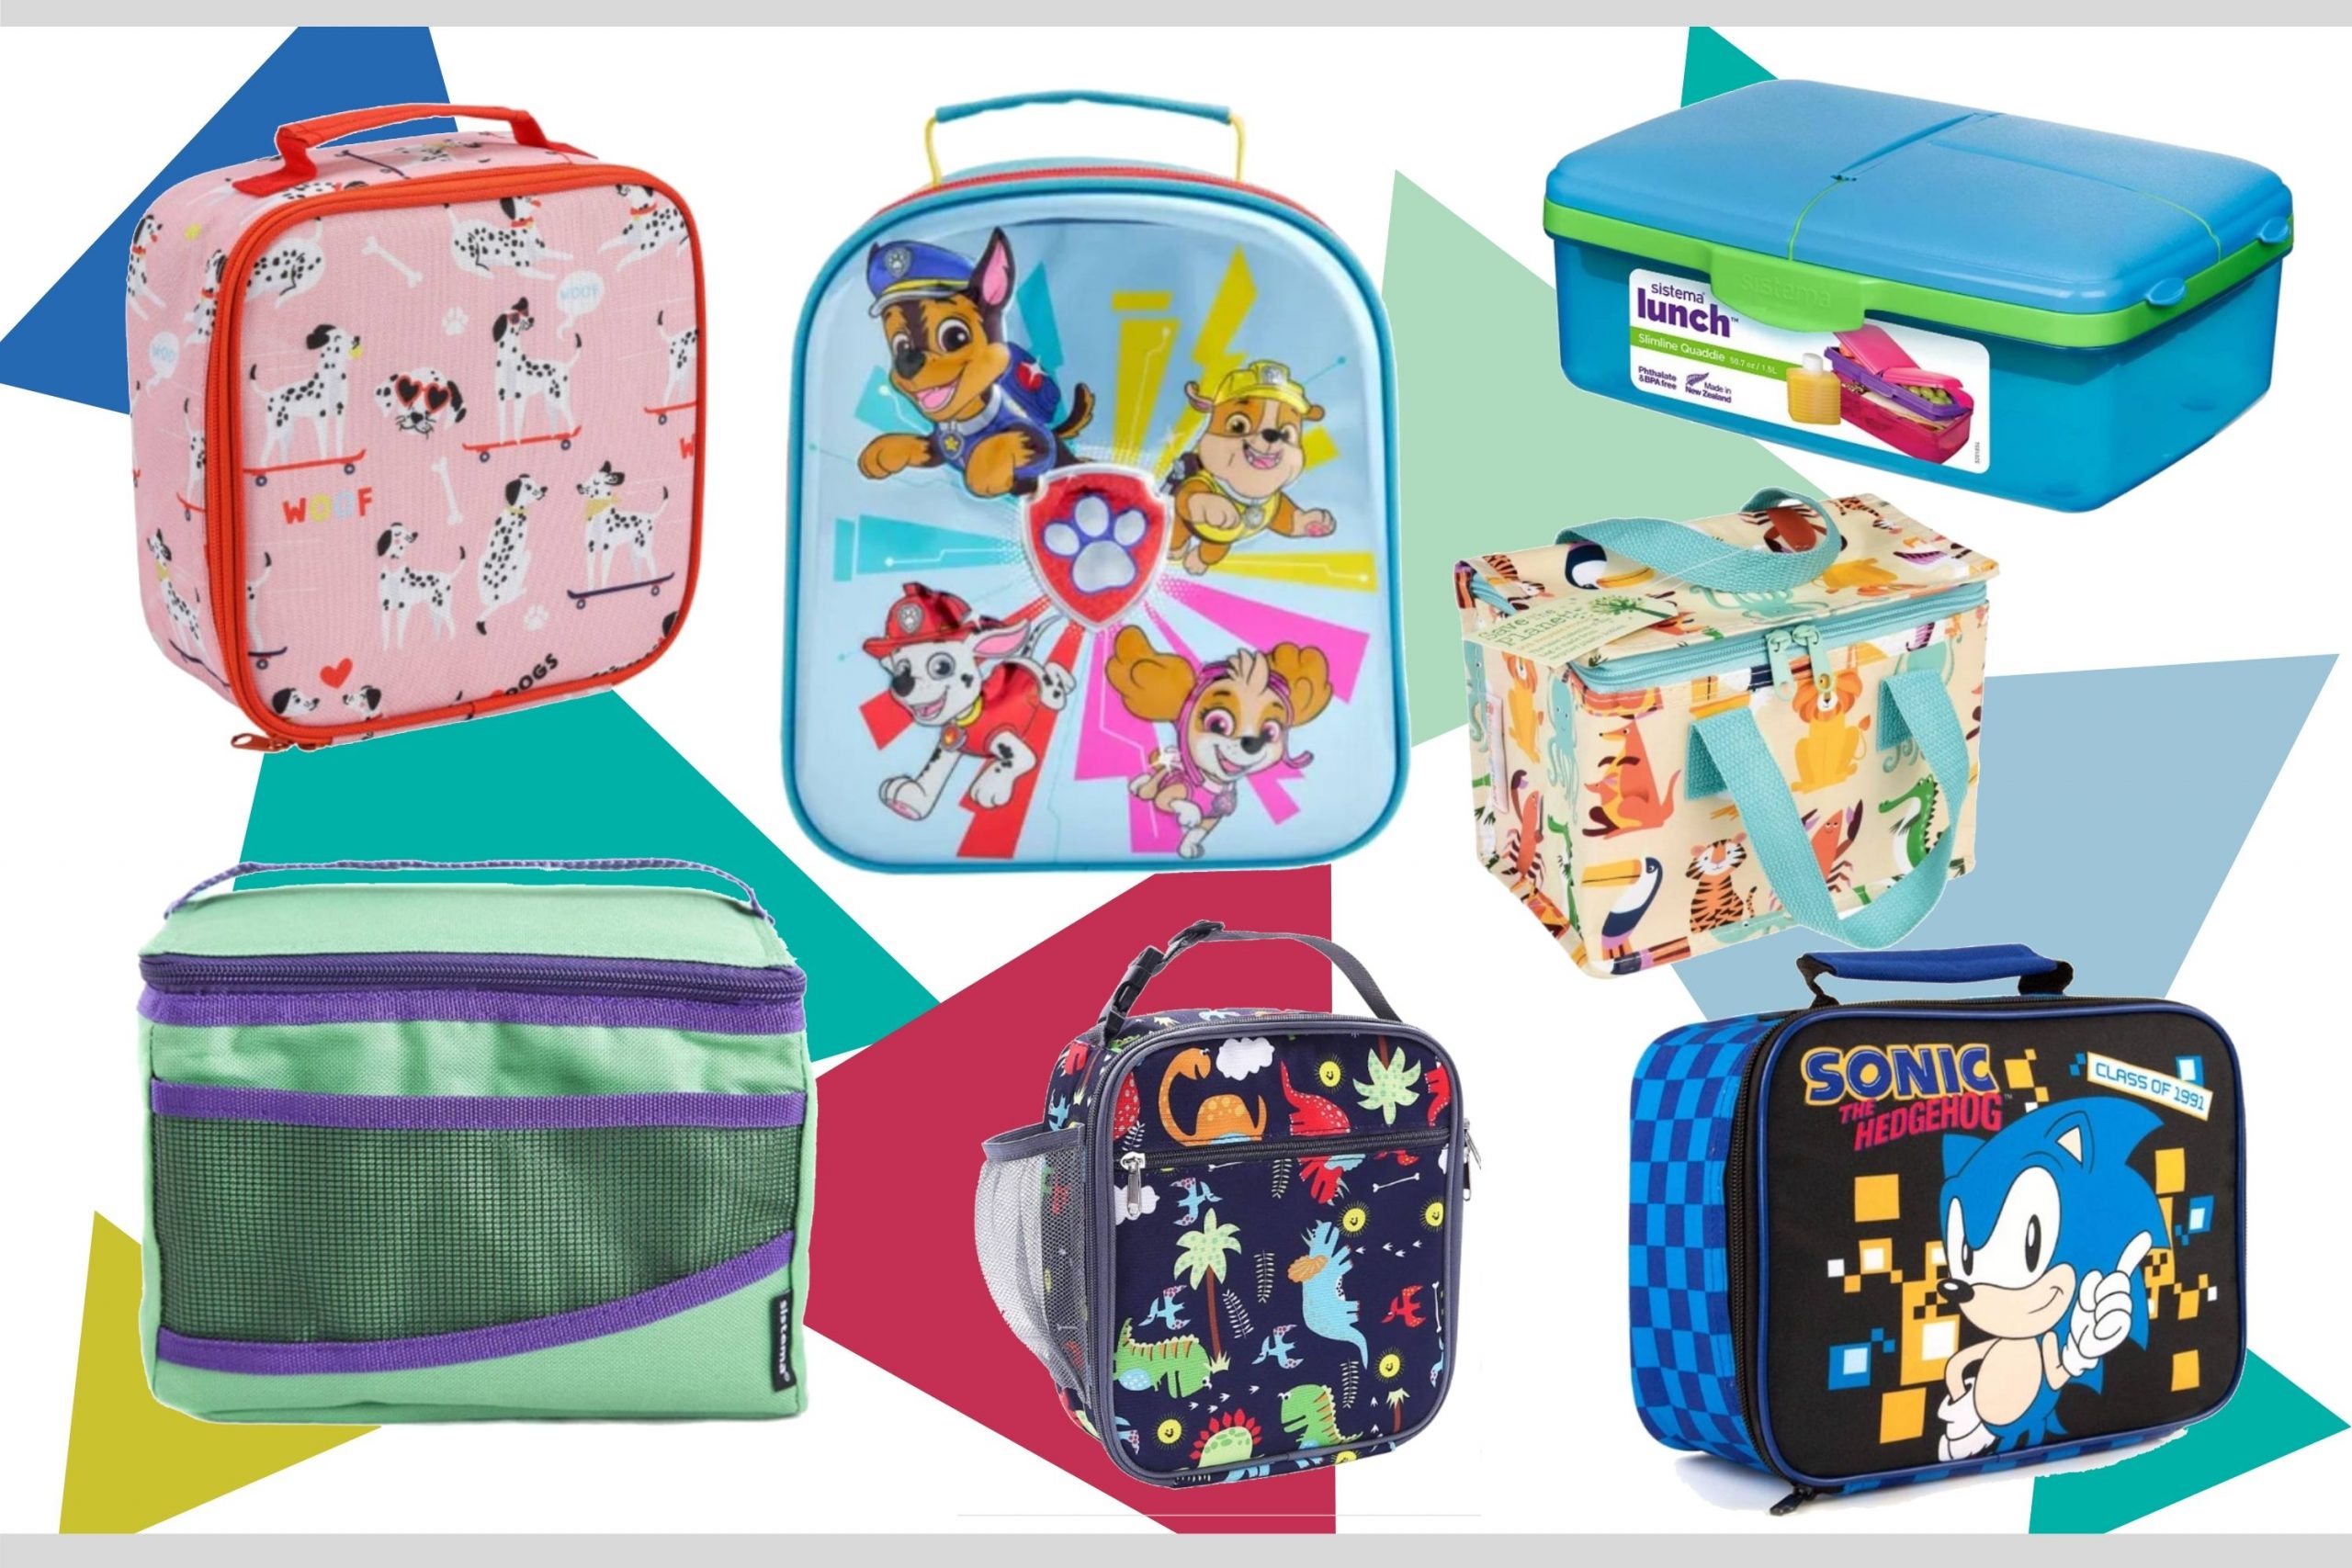 15 Best Bento Boxes for Kids in 2022 - Insulated Kids Bento Lunch Boxes